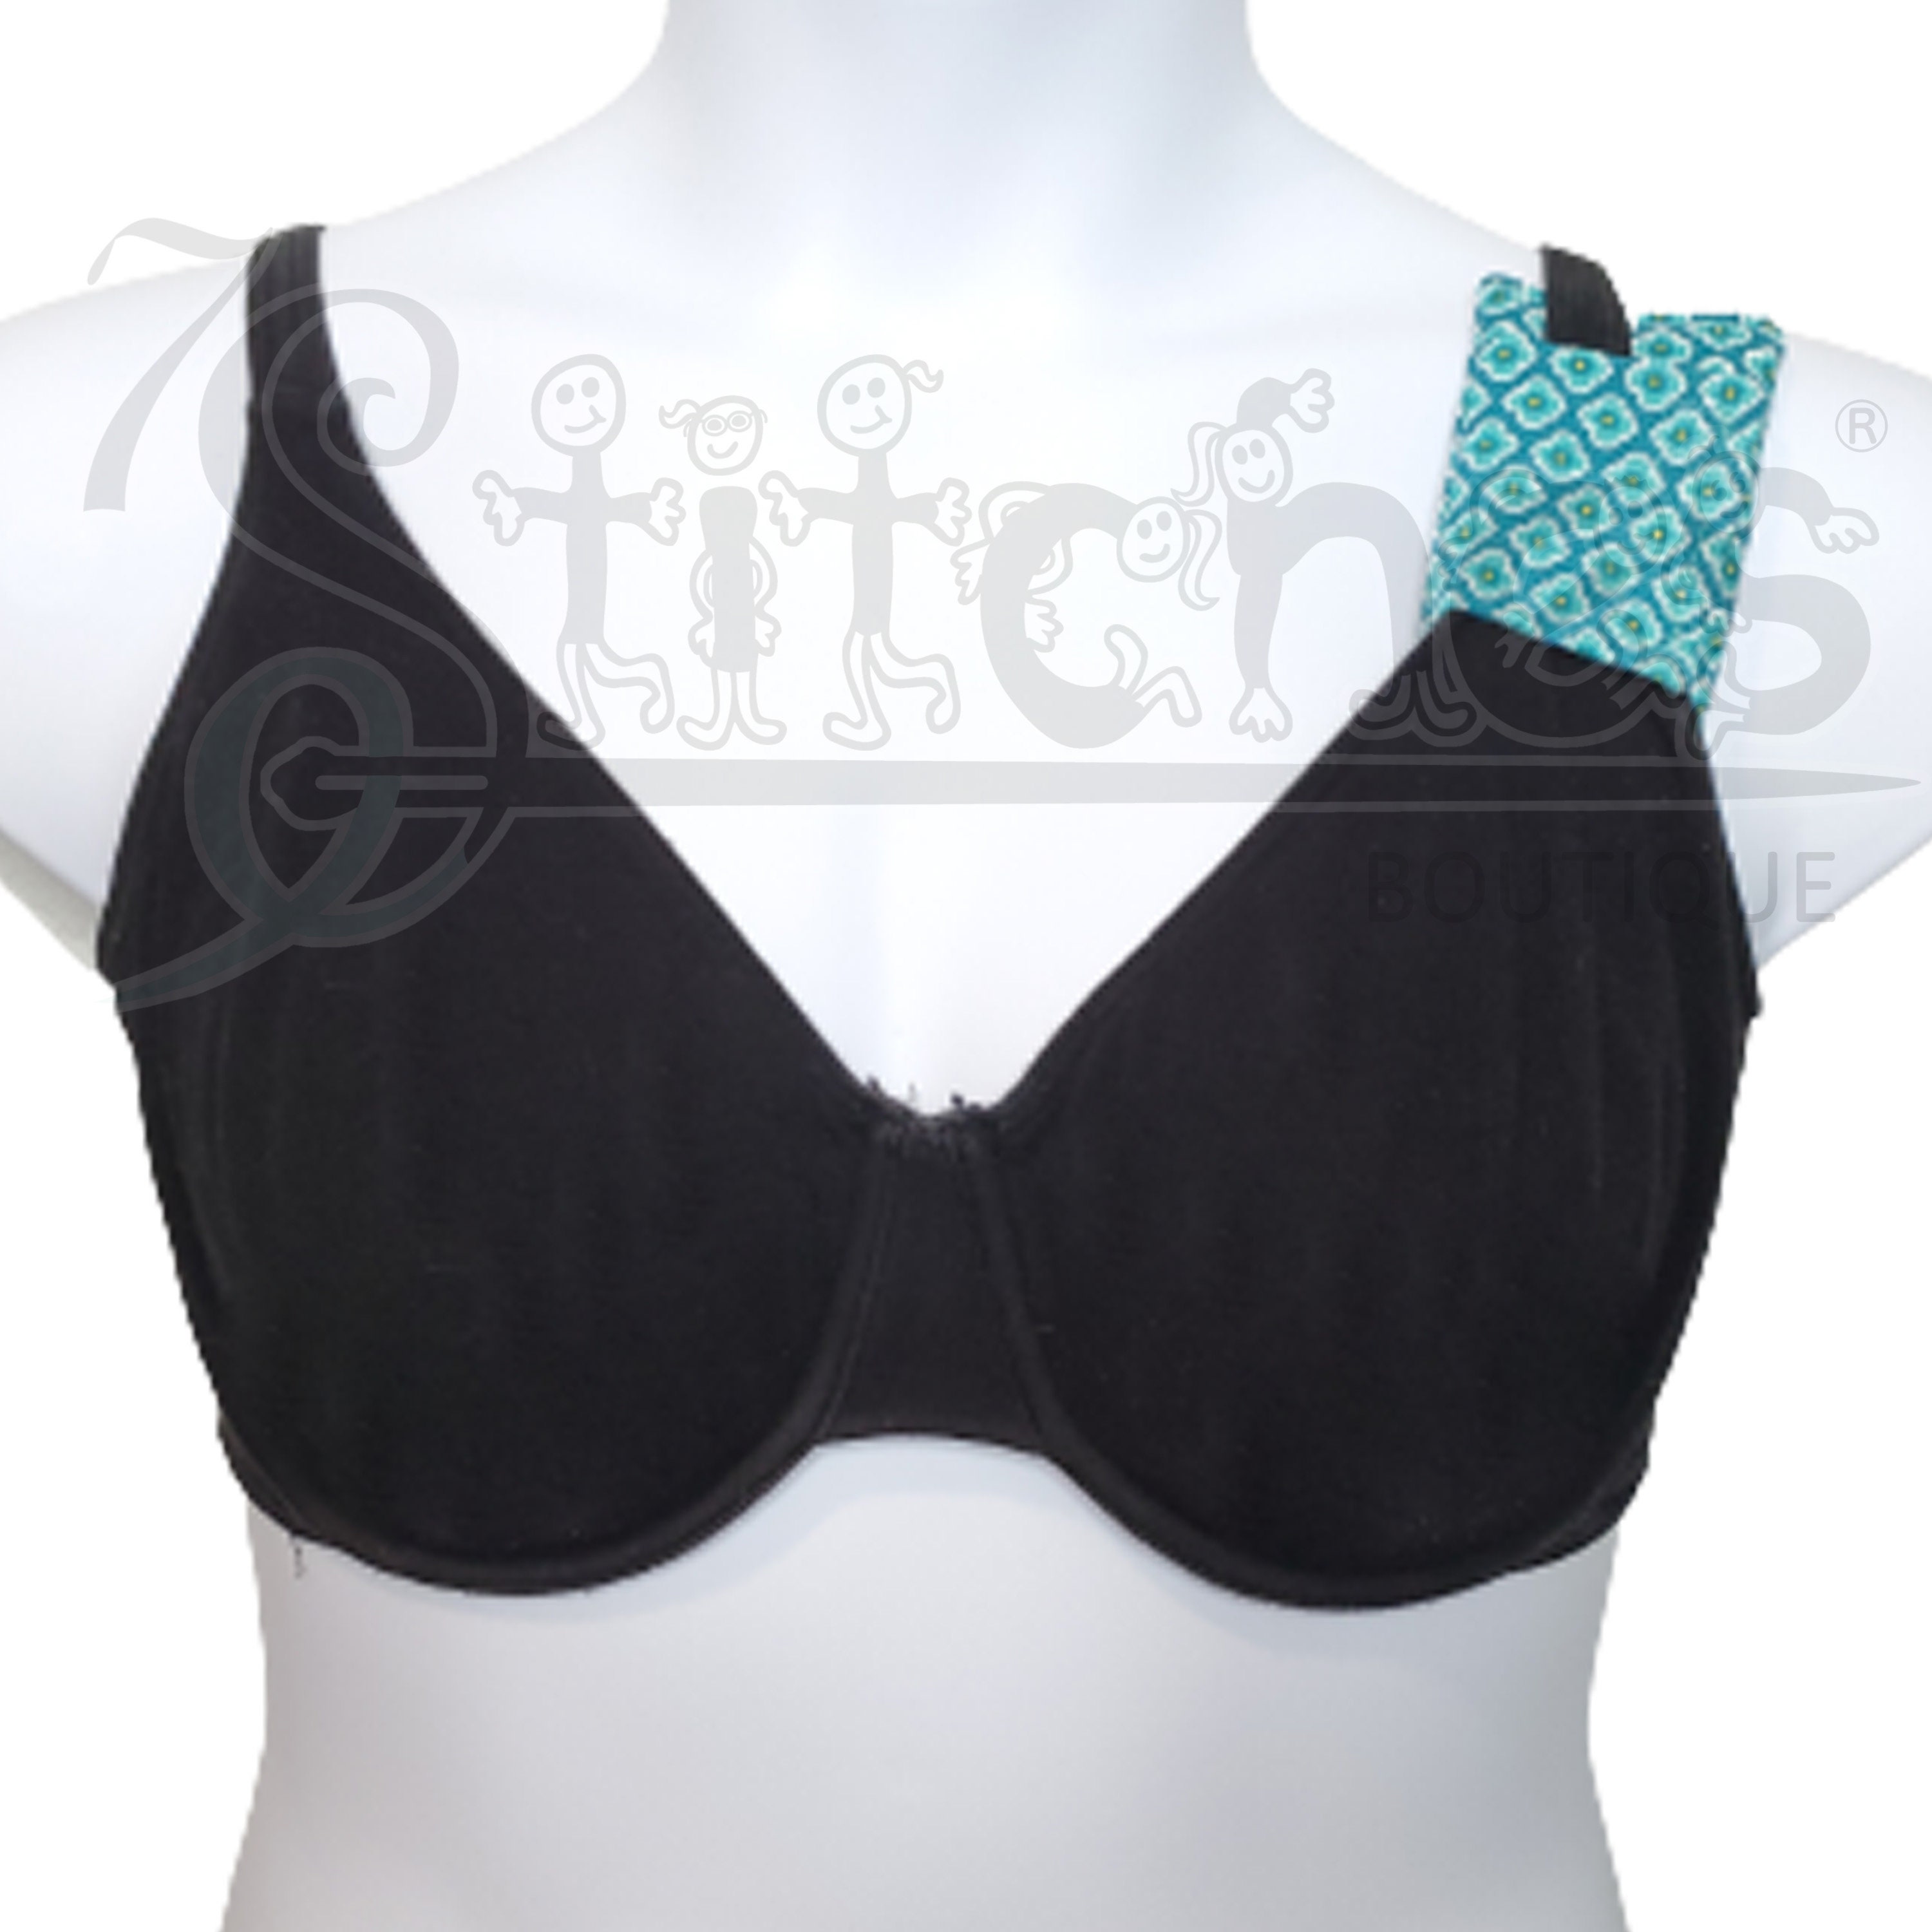 Bra Strap Padding for Pacemakers, Chemo Ports or Implanted Devices